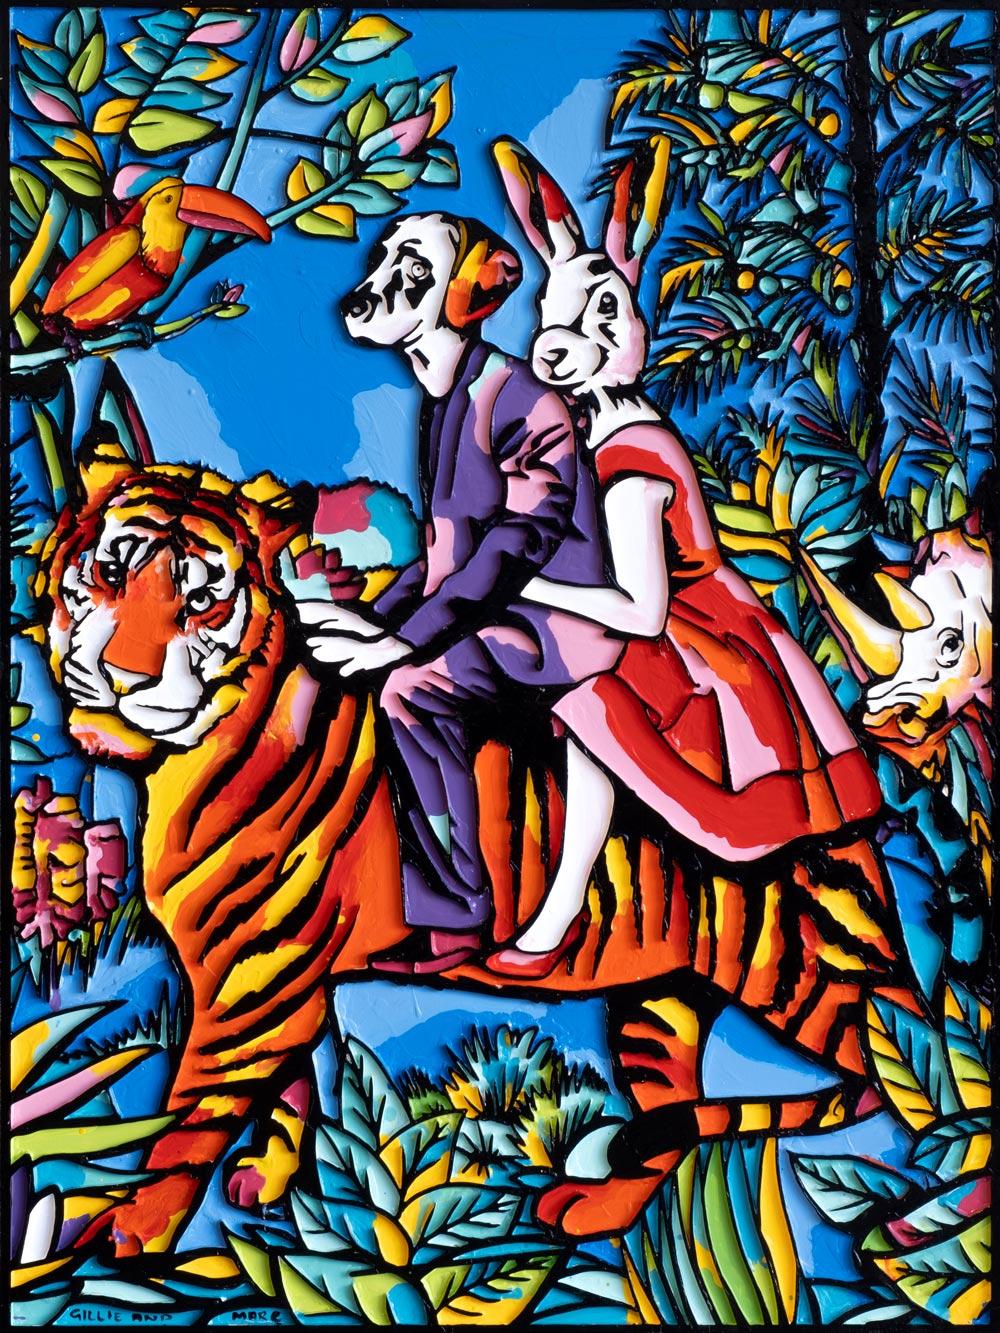 Gillie and Marc Schattner Figurative Print - Animal Print - Limited Edition - Art - Gillie and Marc - Tiger Jungle Adventure